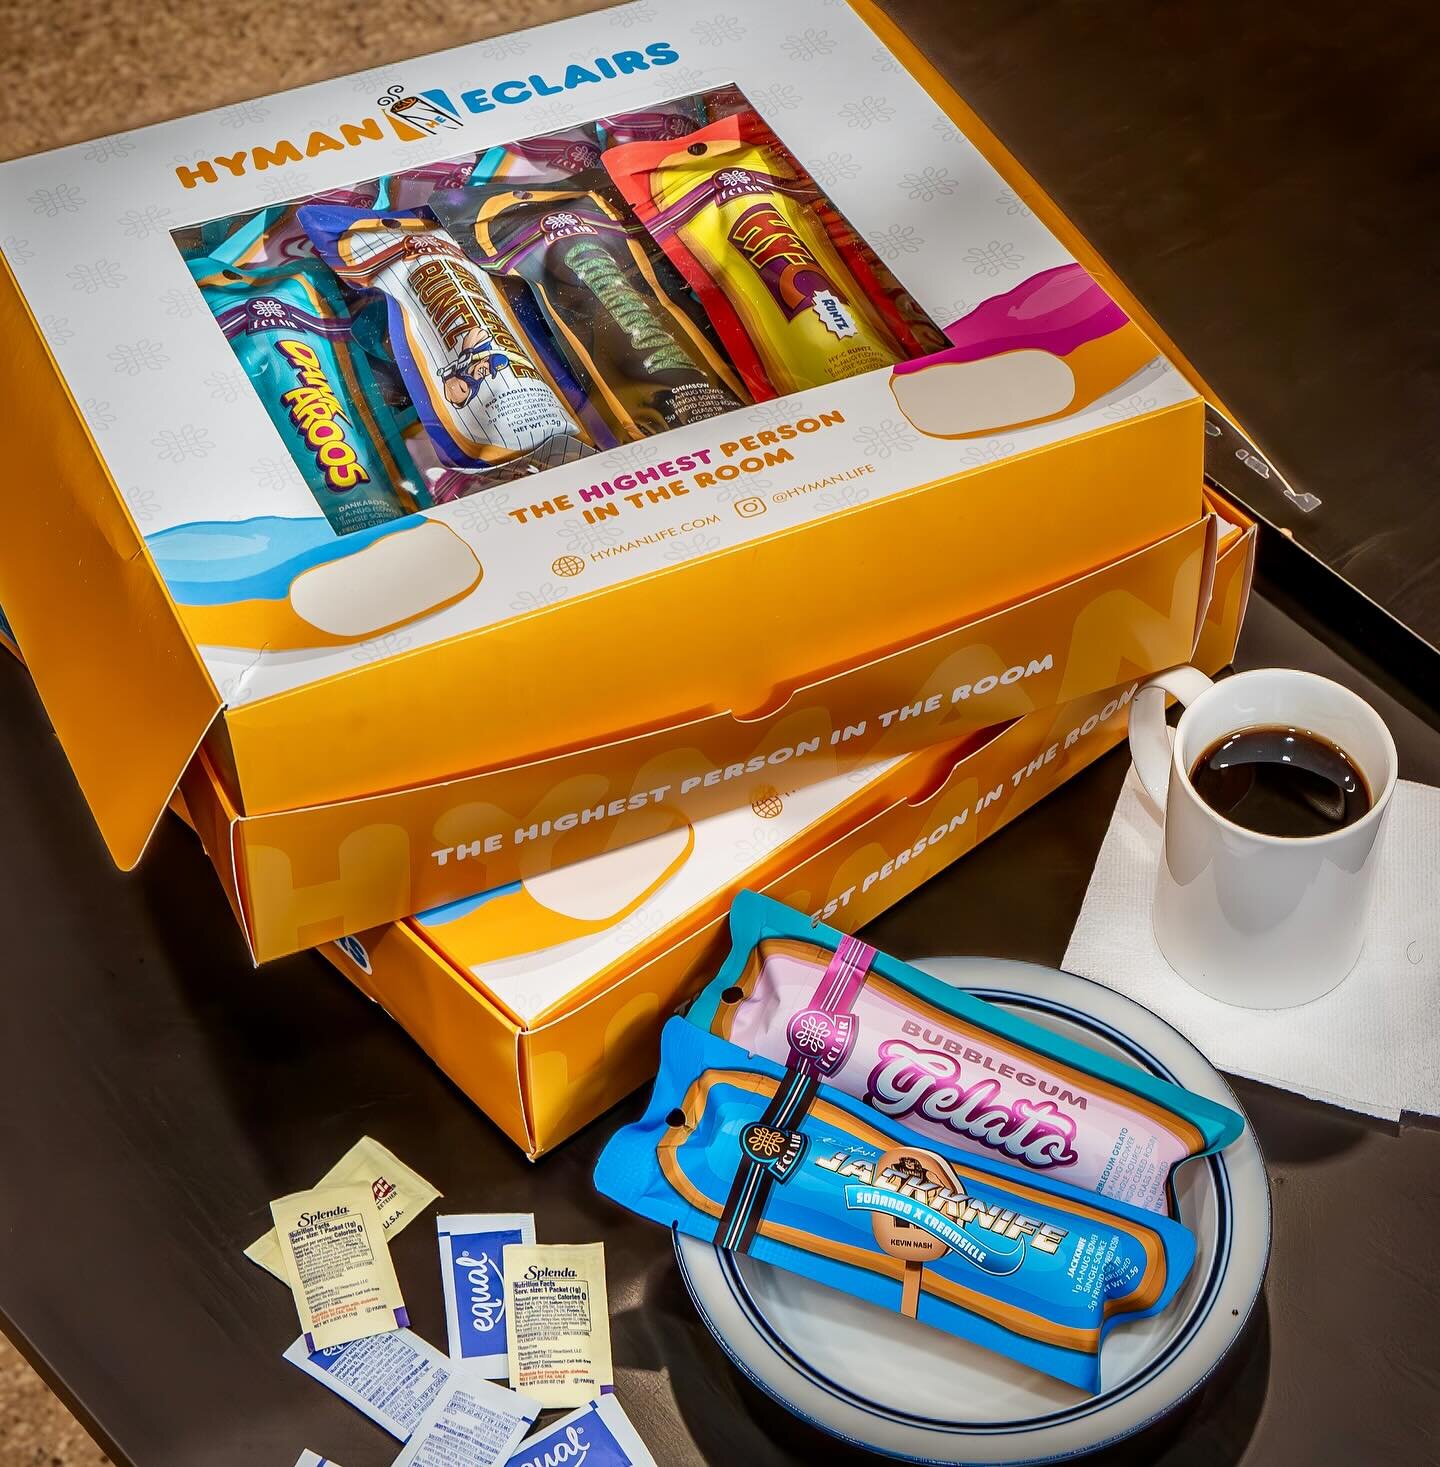 Start your mornings off right! ☕️ 🍩  with our latest drop!! @hyman.life 

#staysticky #muskegon #eclair #morning #coffee #michigan #bakery #wake #bake